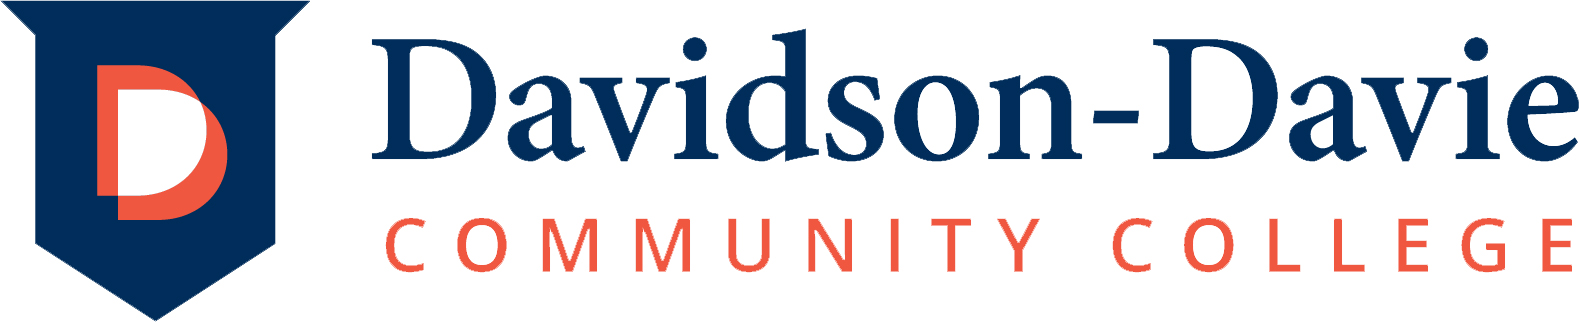 DCCC The College of Davidson and Davie Counties (Logo)